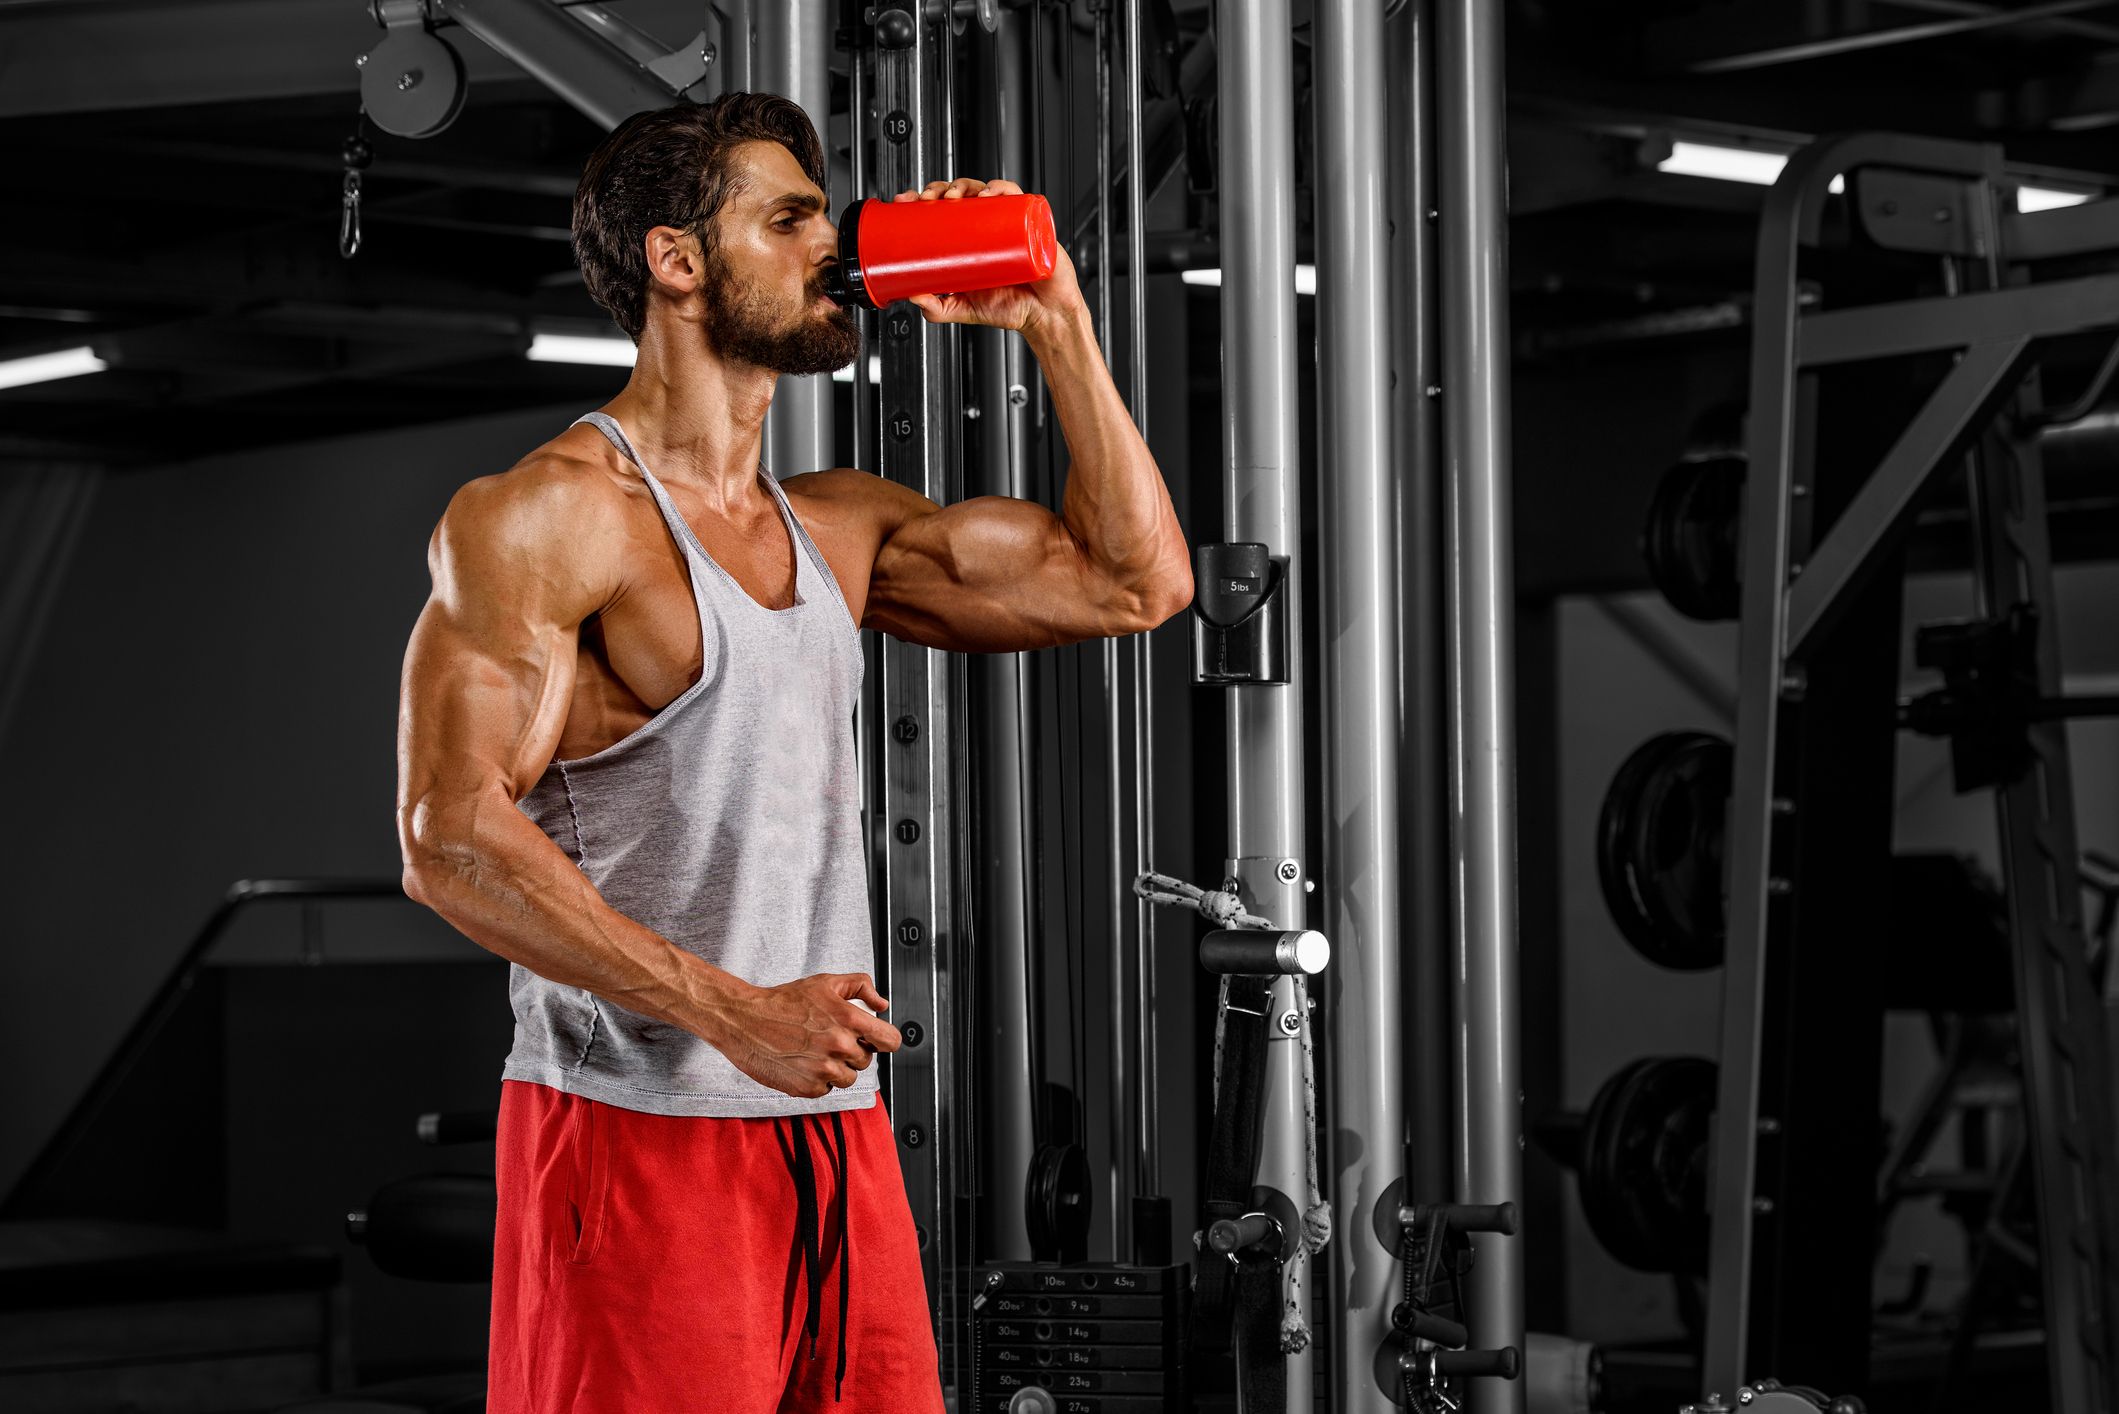 Do You Need To Stop Drinking If You Want To Build Muscle?